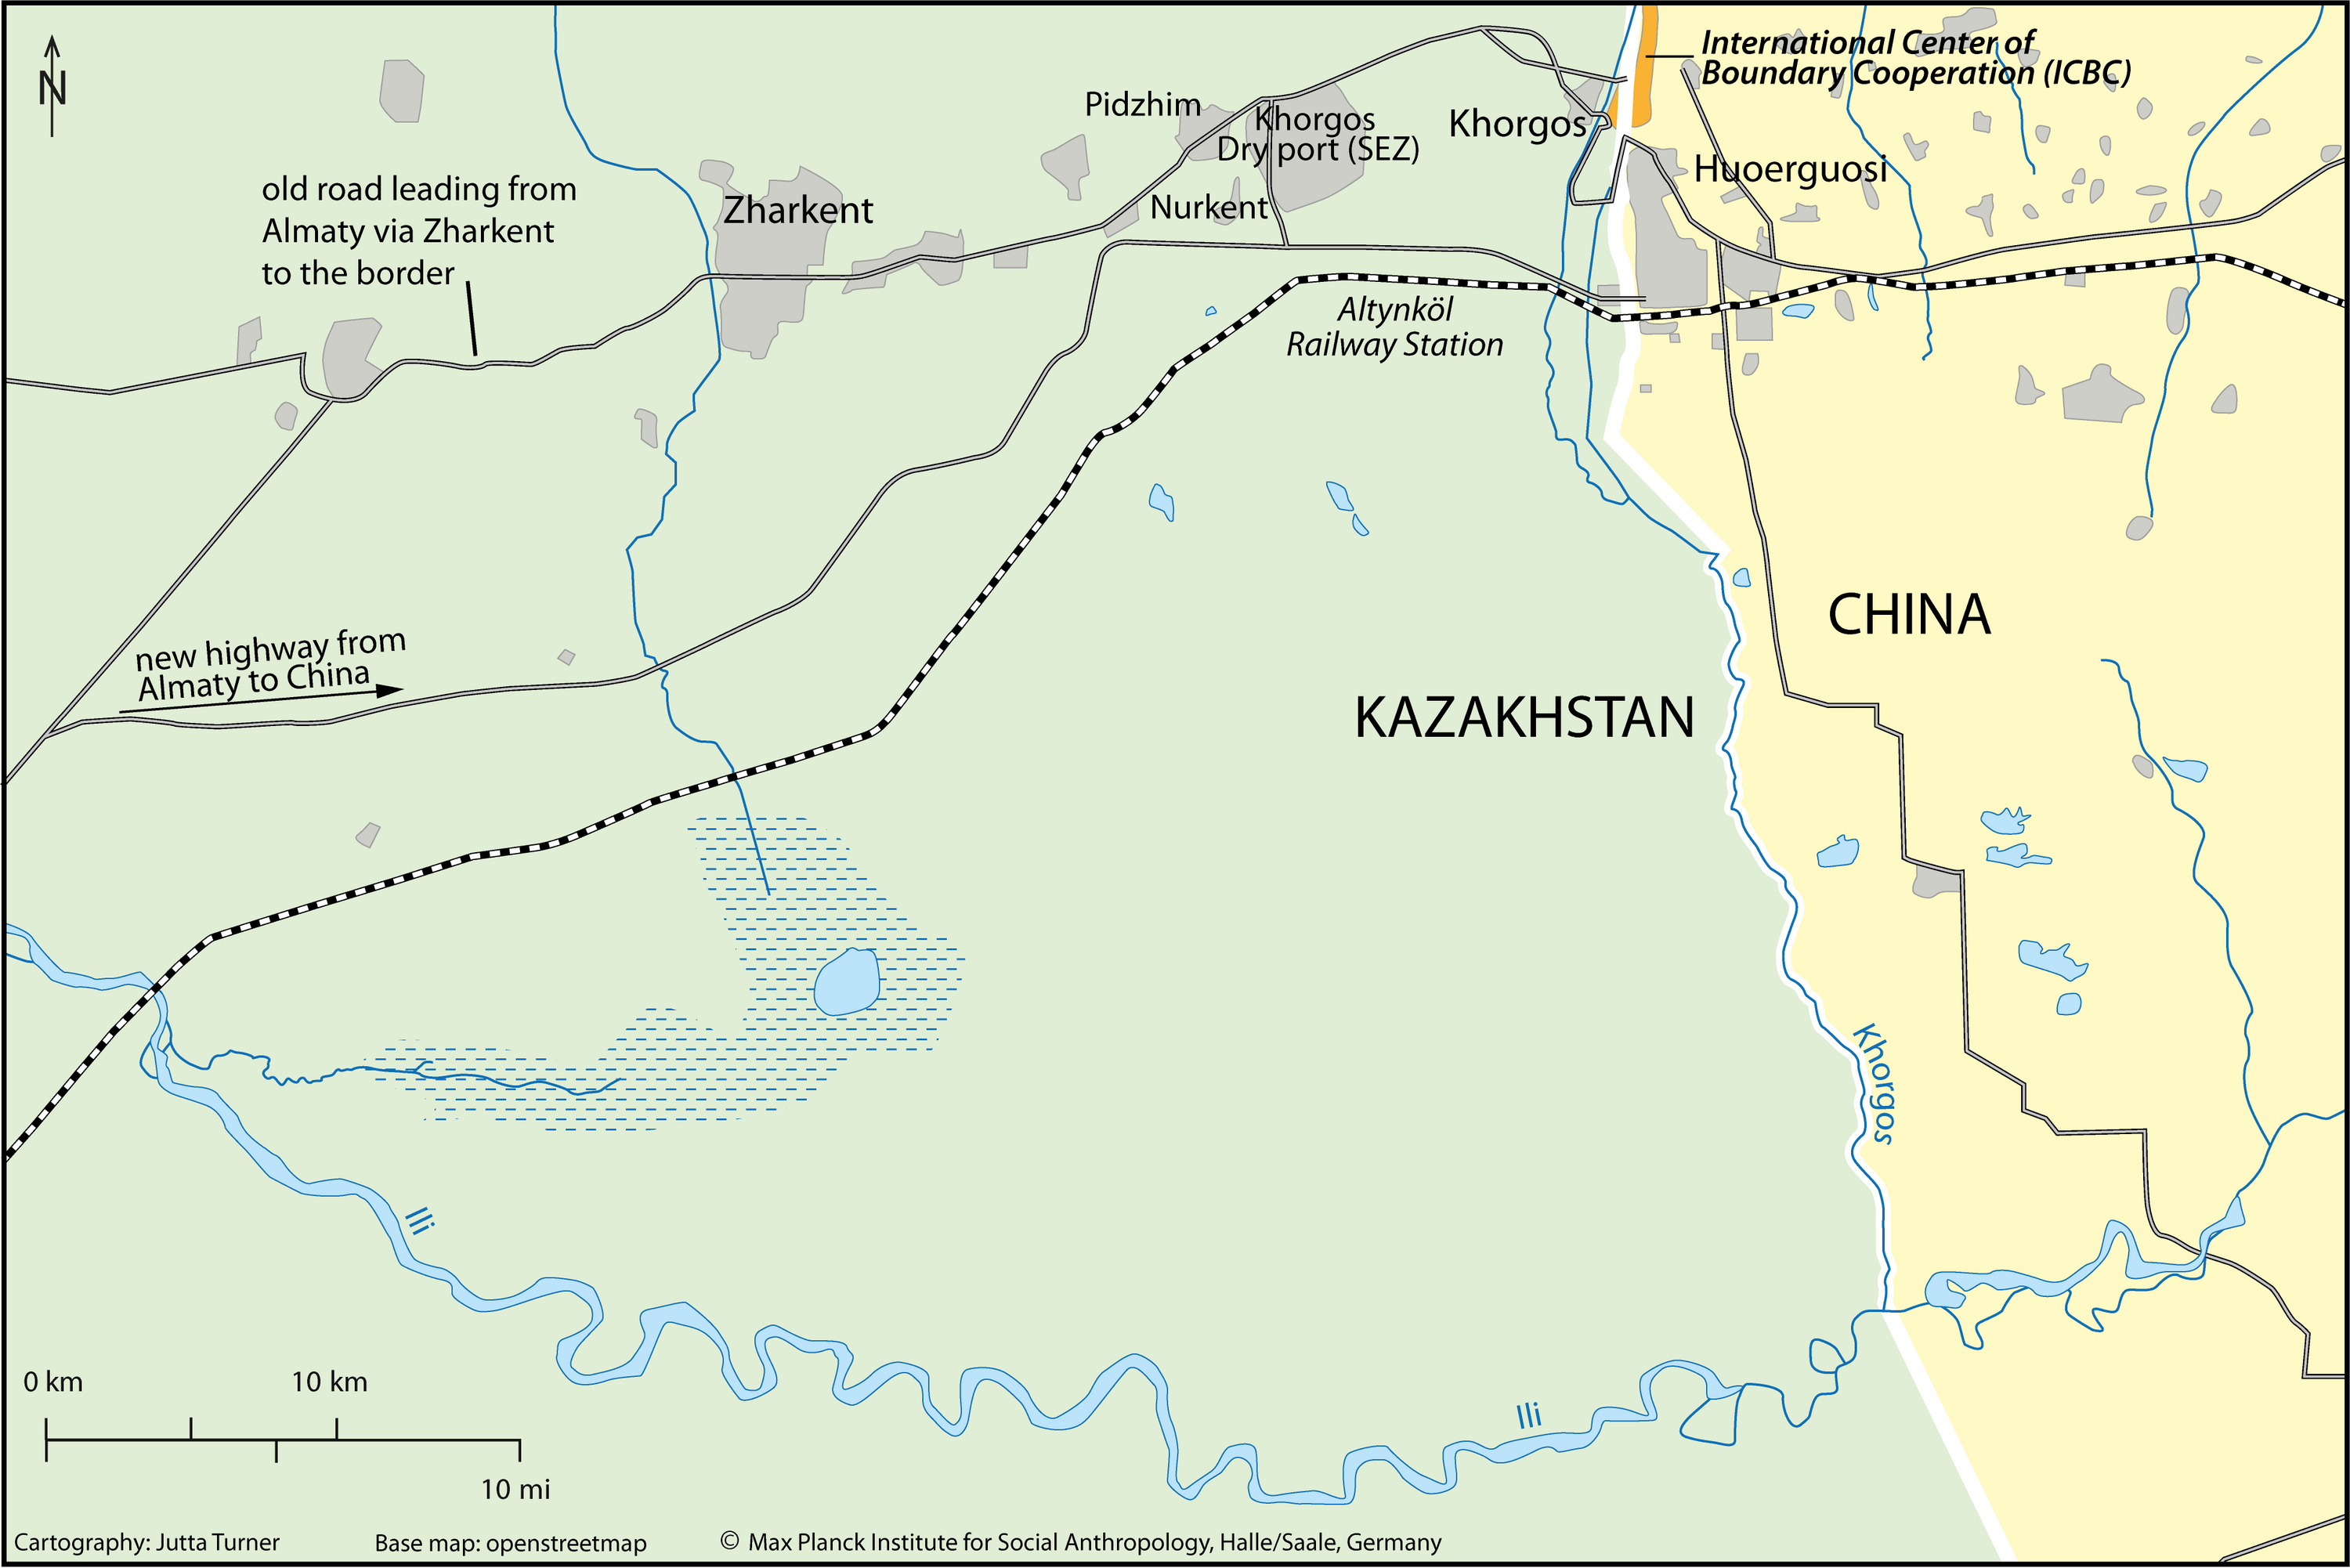 The picture shows a map of Kazakhstan and China. To the west, Kazakhstan occupies about 2/3 of the map. China occupies about 1/3 of the space on the east of the map. The Khorgos River flows from north to south along the Sino-Kazakh border. At the top of the map, the International Center of Boundary Cooperation (ICBC) stretches along both sides of the border. On the Chinese side, just south of the ICBC, is the Chinese city of Huoerguosi. On the Khazak side of the ICBC is the village Khorgos. West of Khorgos is the Khorgos Dry Port. Running across the map from west to east is the old road leading from Almaty via Zharkent to the border. Just south of the old road is the new highway from Almaty to China. Just south of the new highway is a railway line that crosses Altynköl Railway Station just before it hits the border.